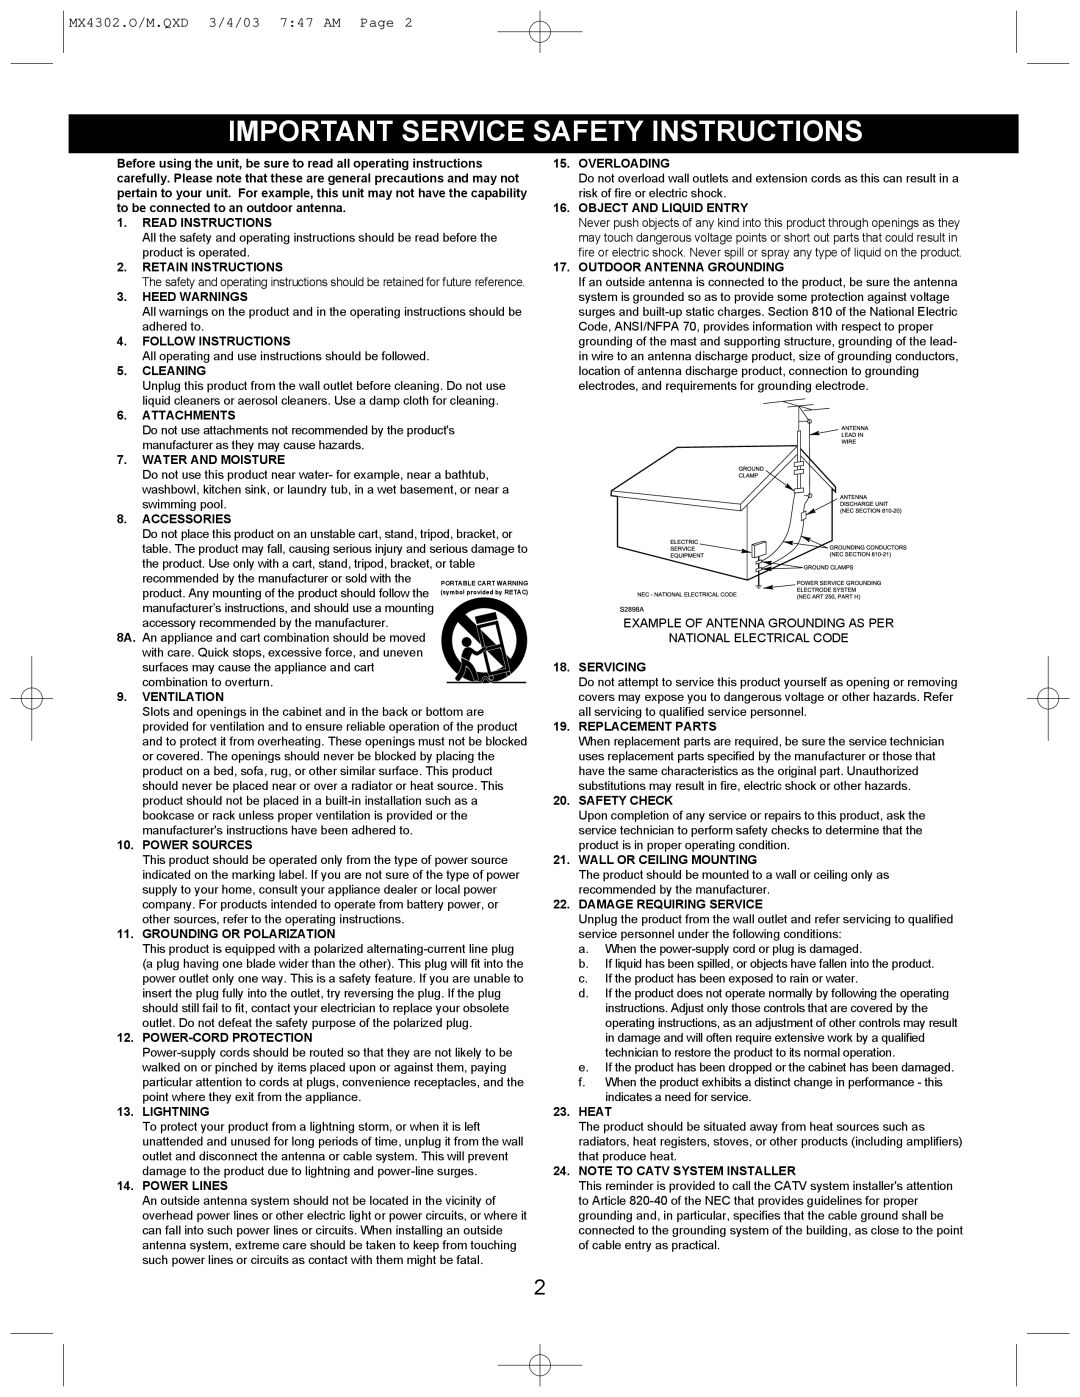 Memorex operating instructions Important Service Safety Instructions, MX4302.O/M.QXD 3/4/03 747 AM Page 